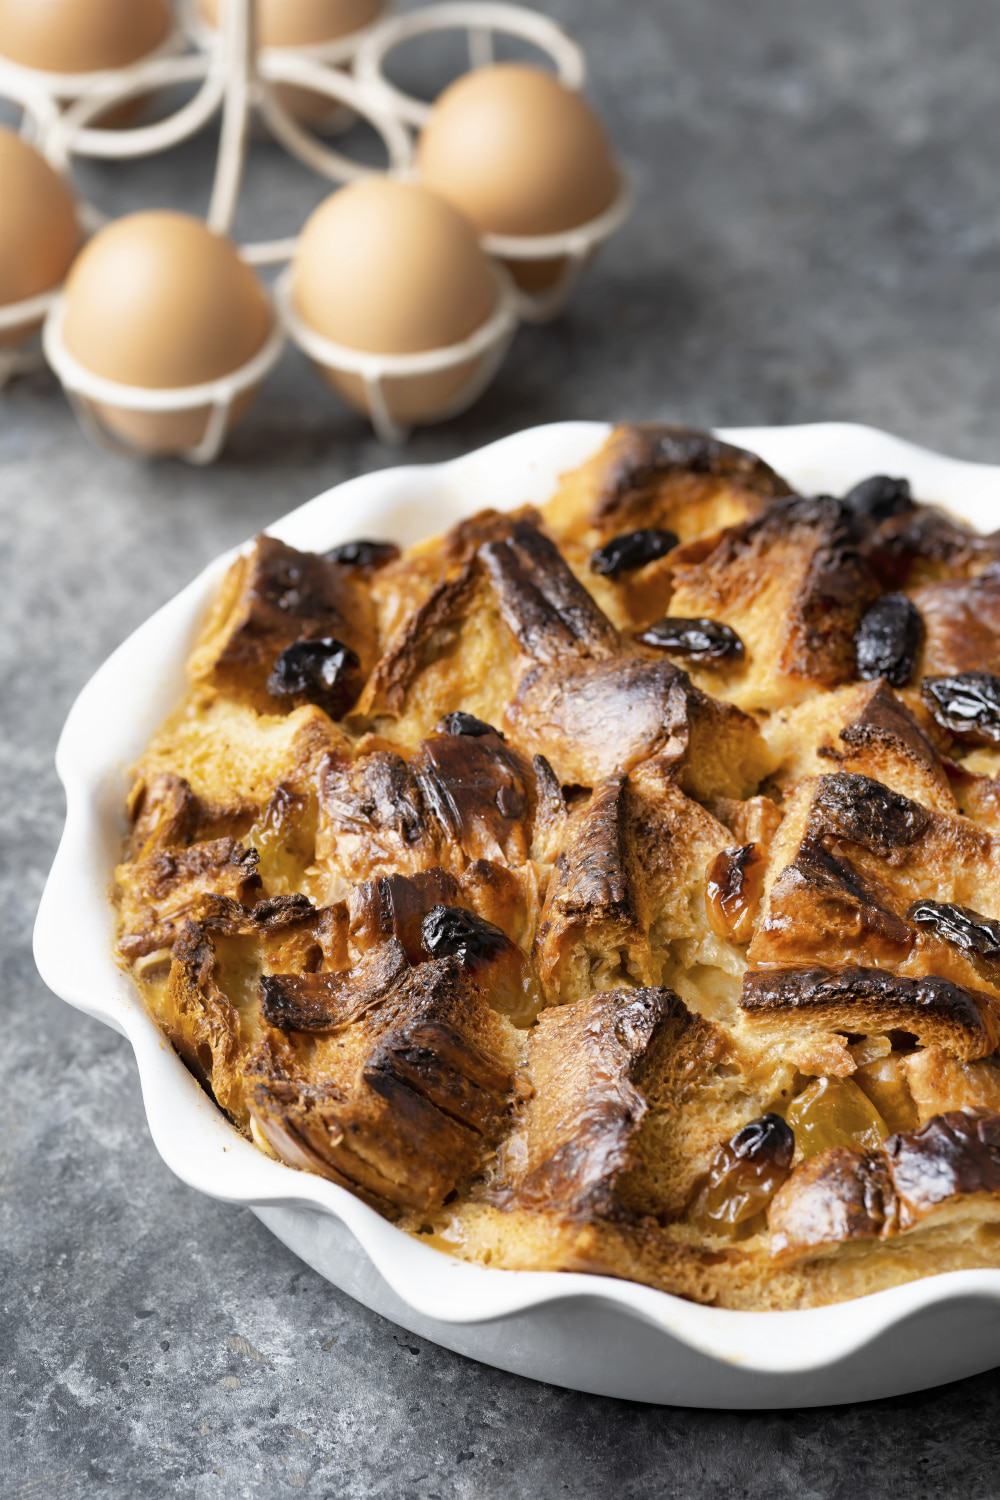 Marmalade Bread And Butter Pudding | Cooking Clue